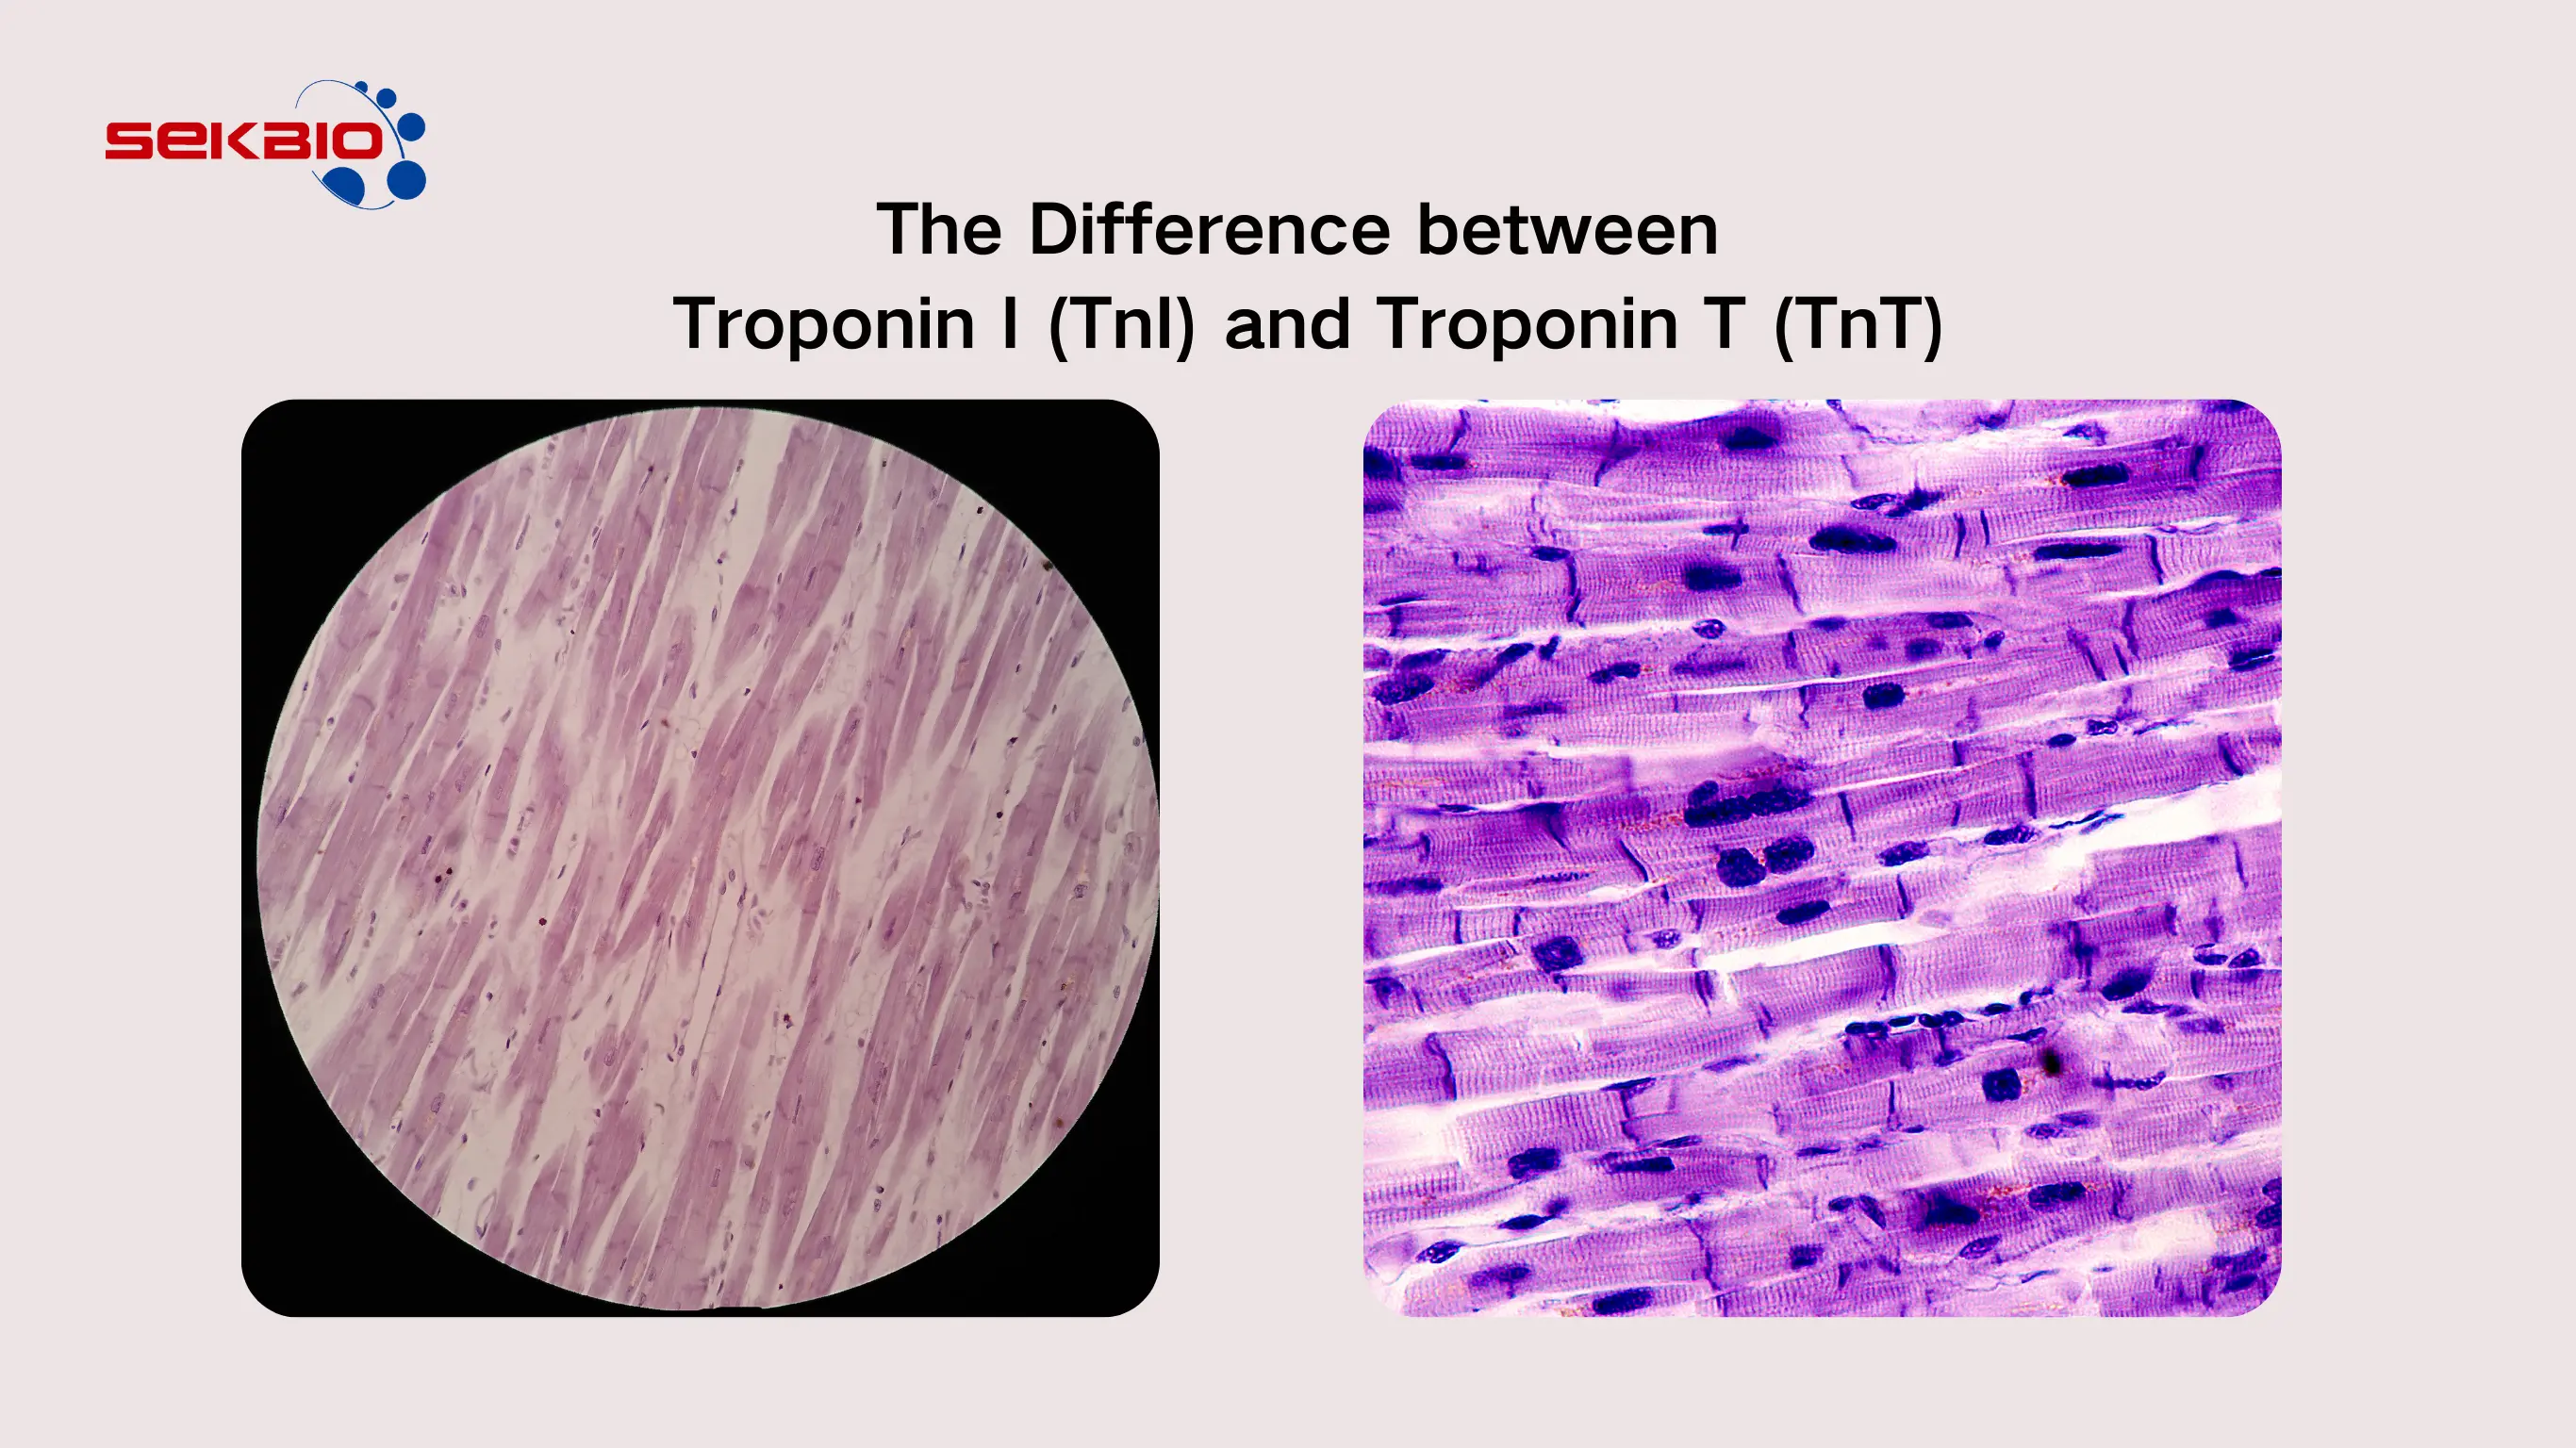 The Difference between Troponin I (TnI) and Troponin T (TnT)